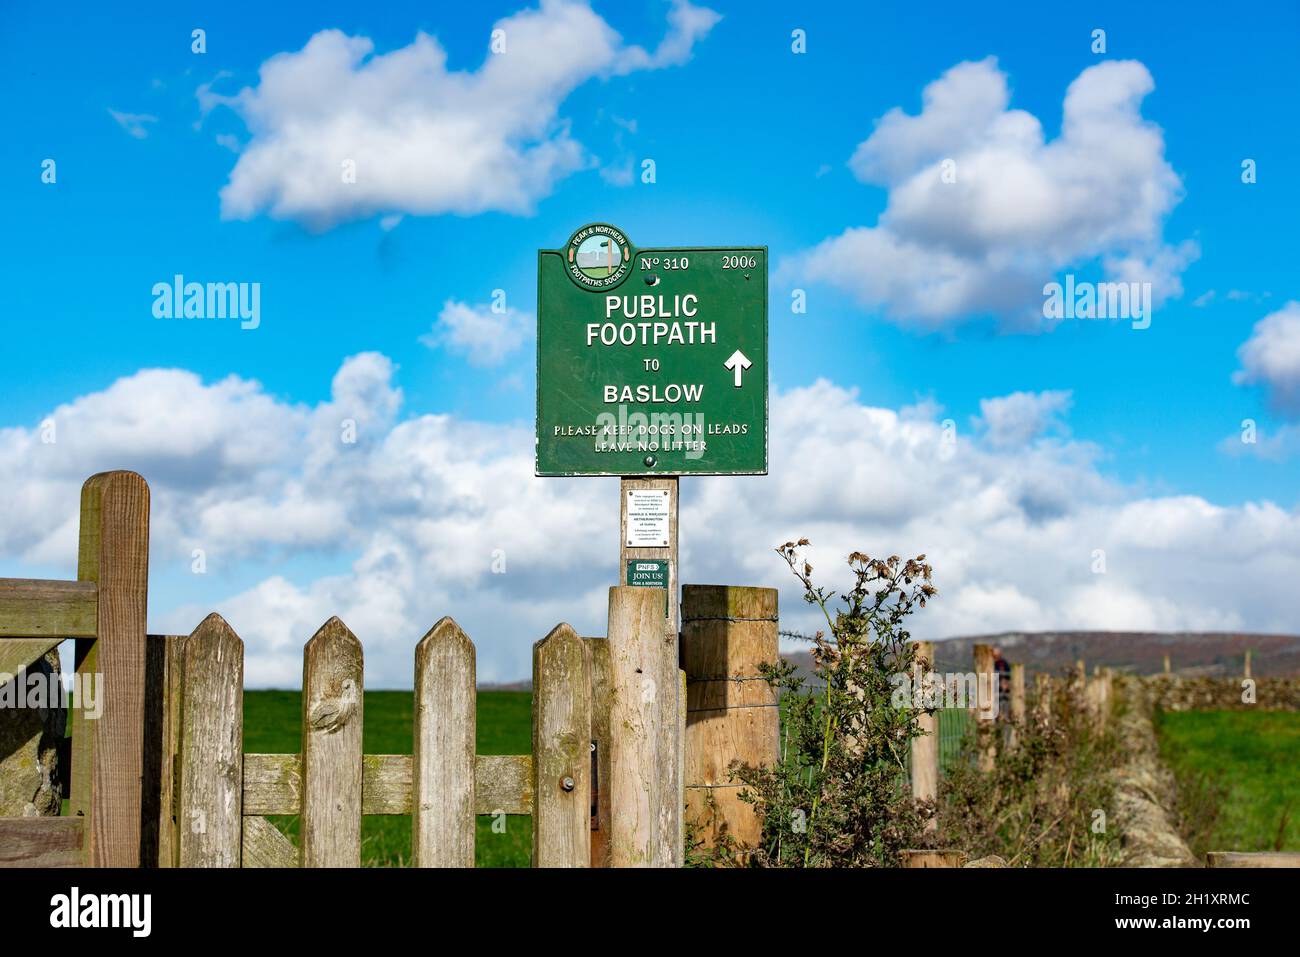 A public footpath sign, Baslow, Derbyshire in the Peak District, UK Stock Photo